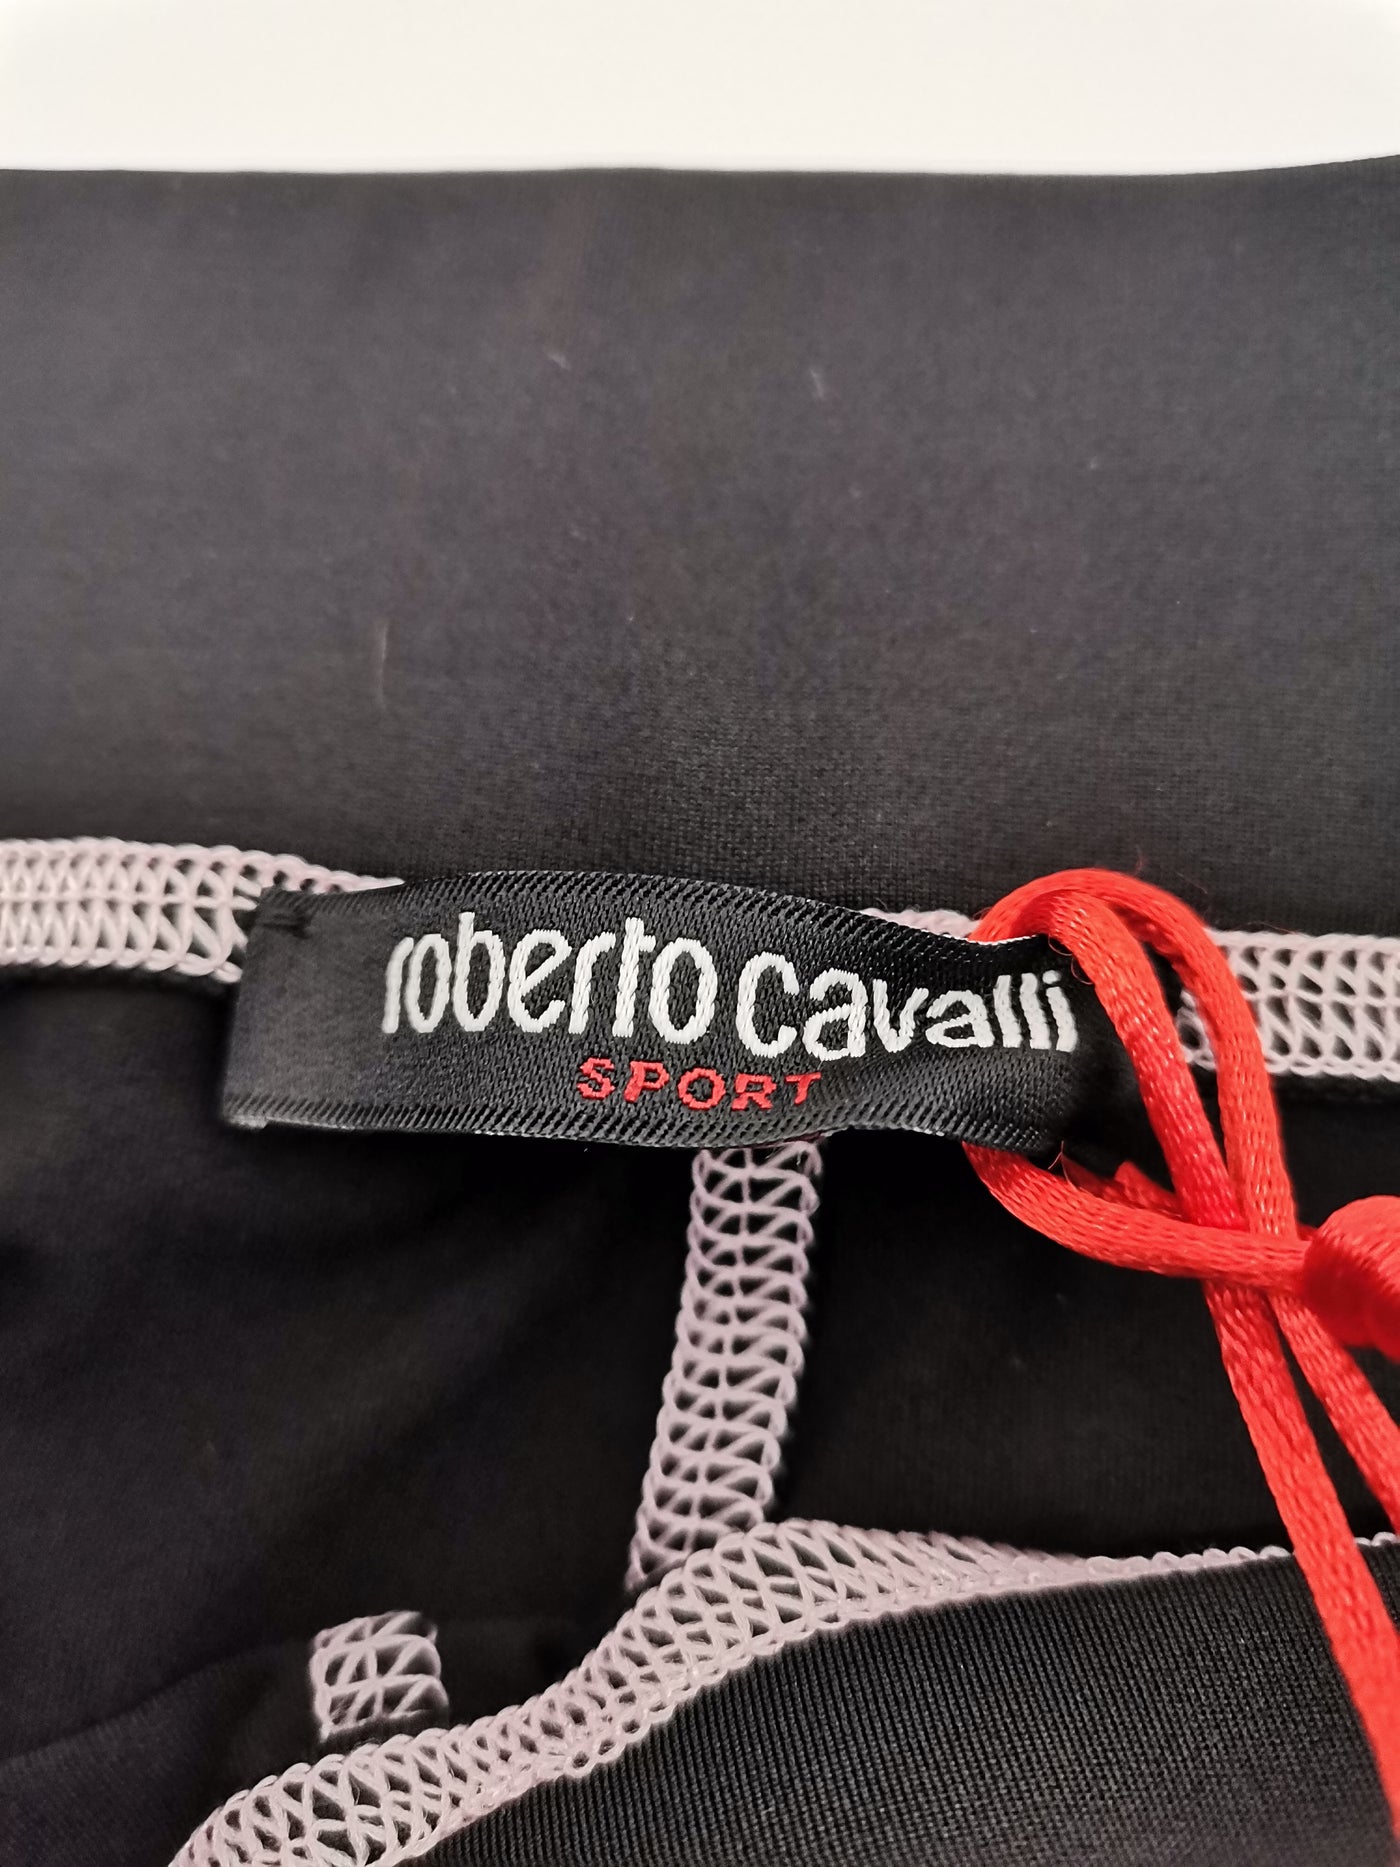 Roberto Cavalli active wear brand new with tags